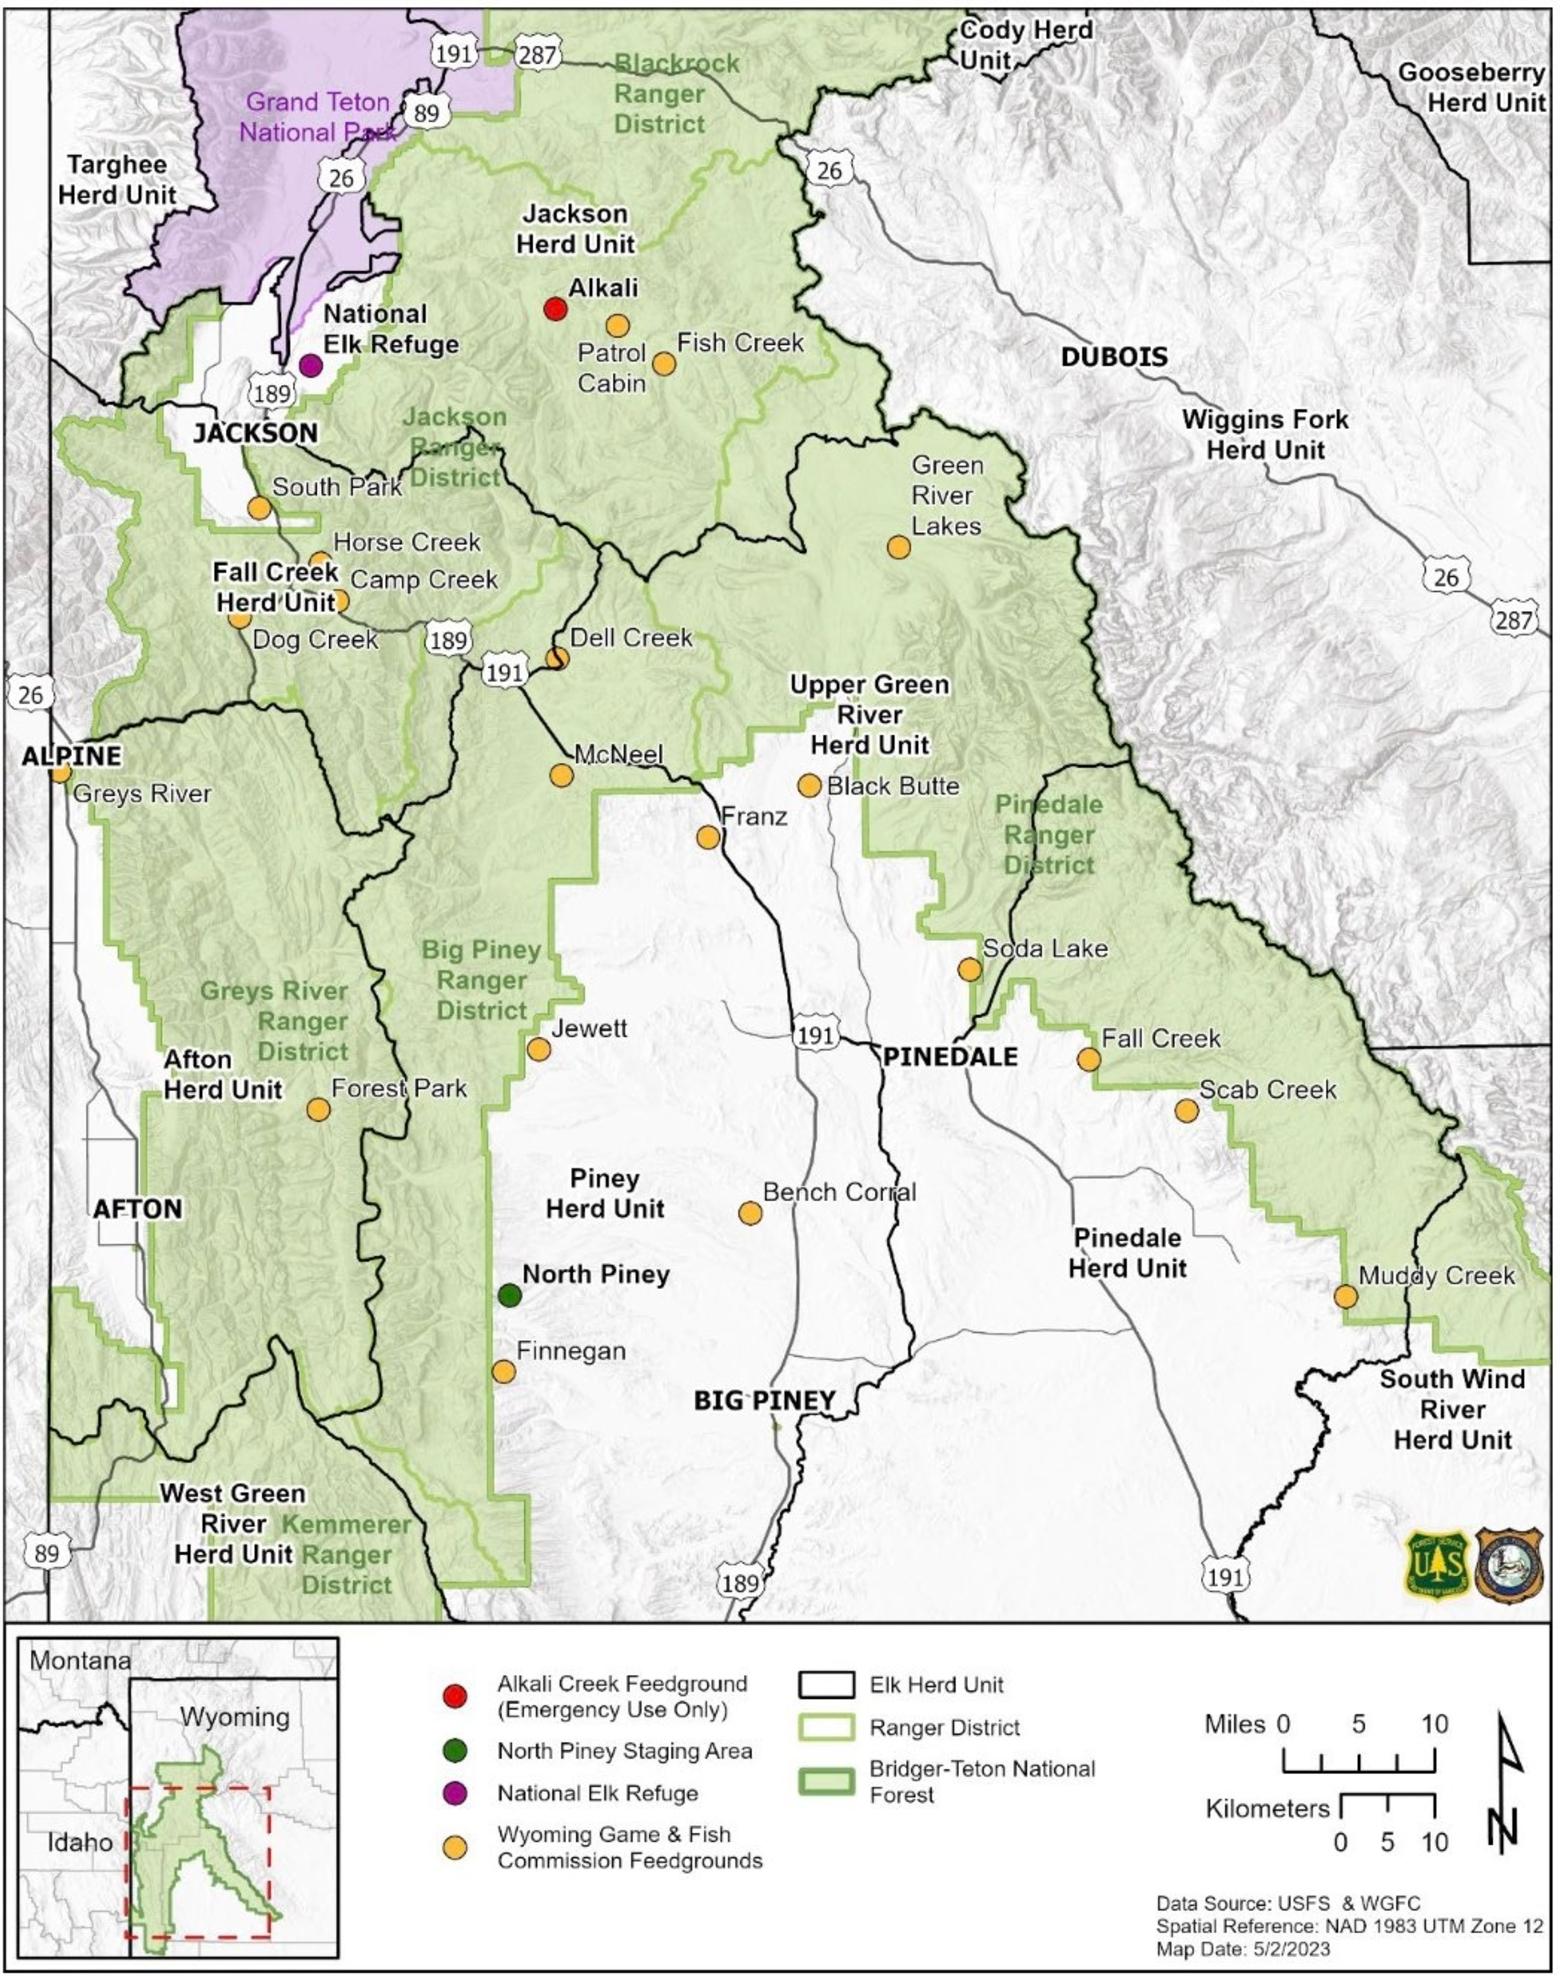 The Bridger-Teton National Forest boundary, ranger district boundaries, elk herd unit boundaries, National Elk Refuge, staging area (North Piney), and WGFC-managed feedgrounds. Map courtesy Bridger-Teton National Forest